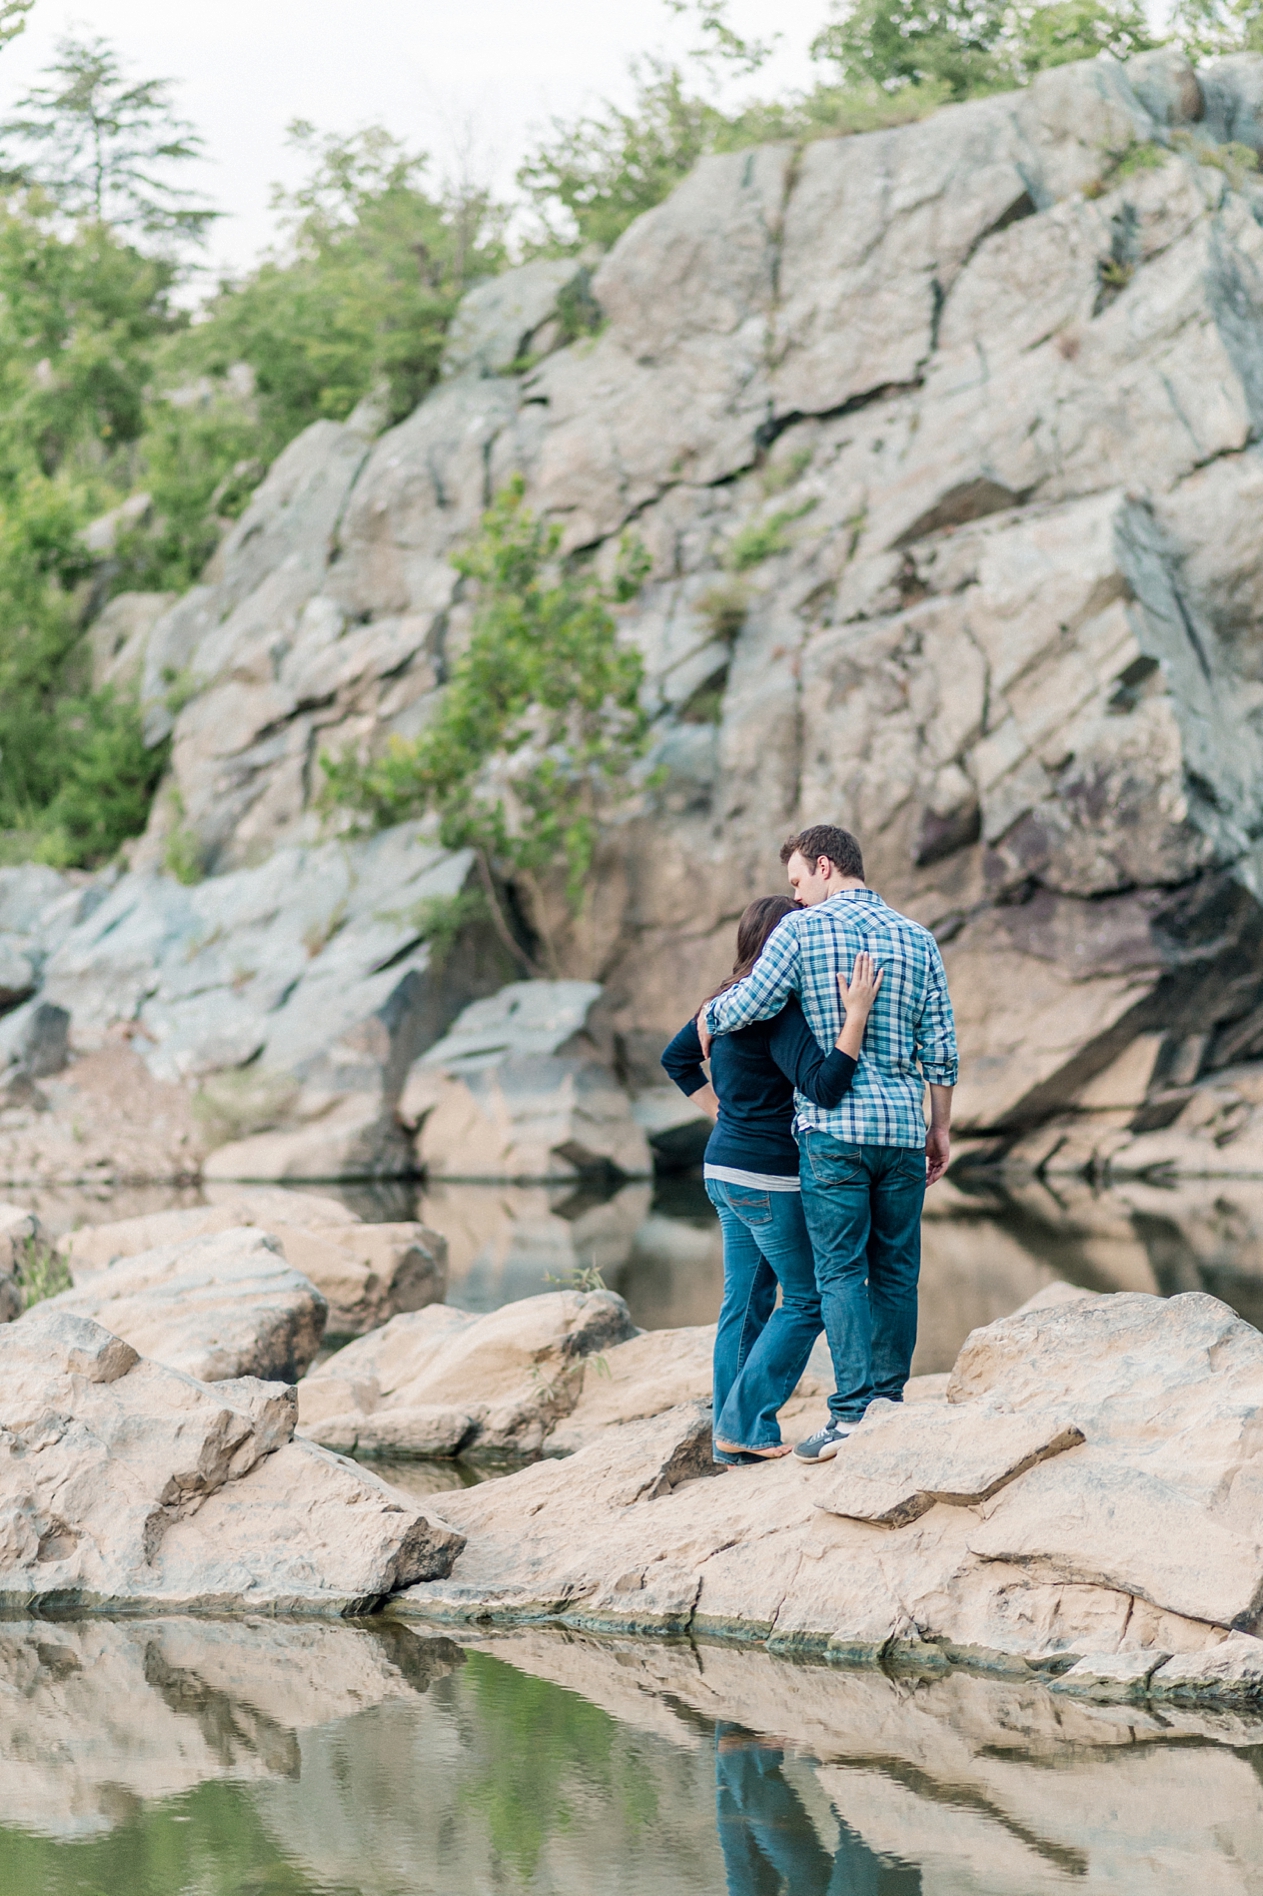 A Classic and Romantic Great Falls, Maryland Engagement session by Washington DC Fine Art Photographer Lauren R Swann